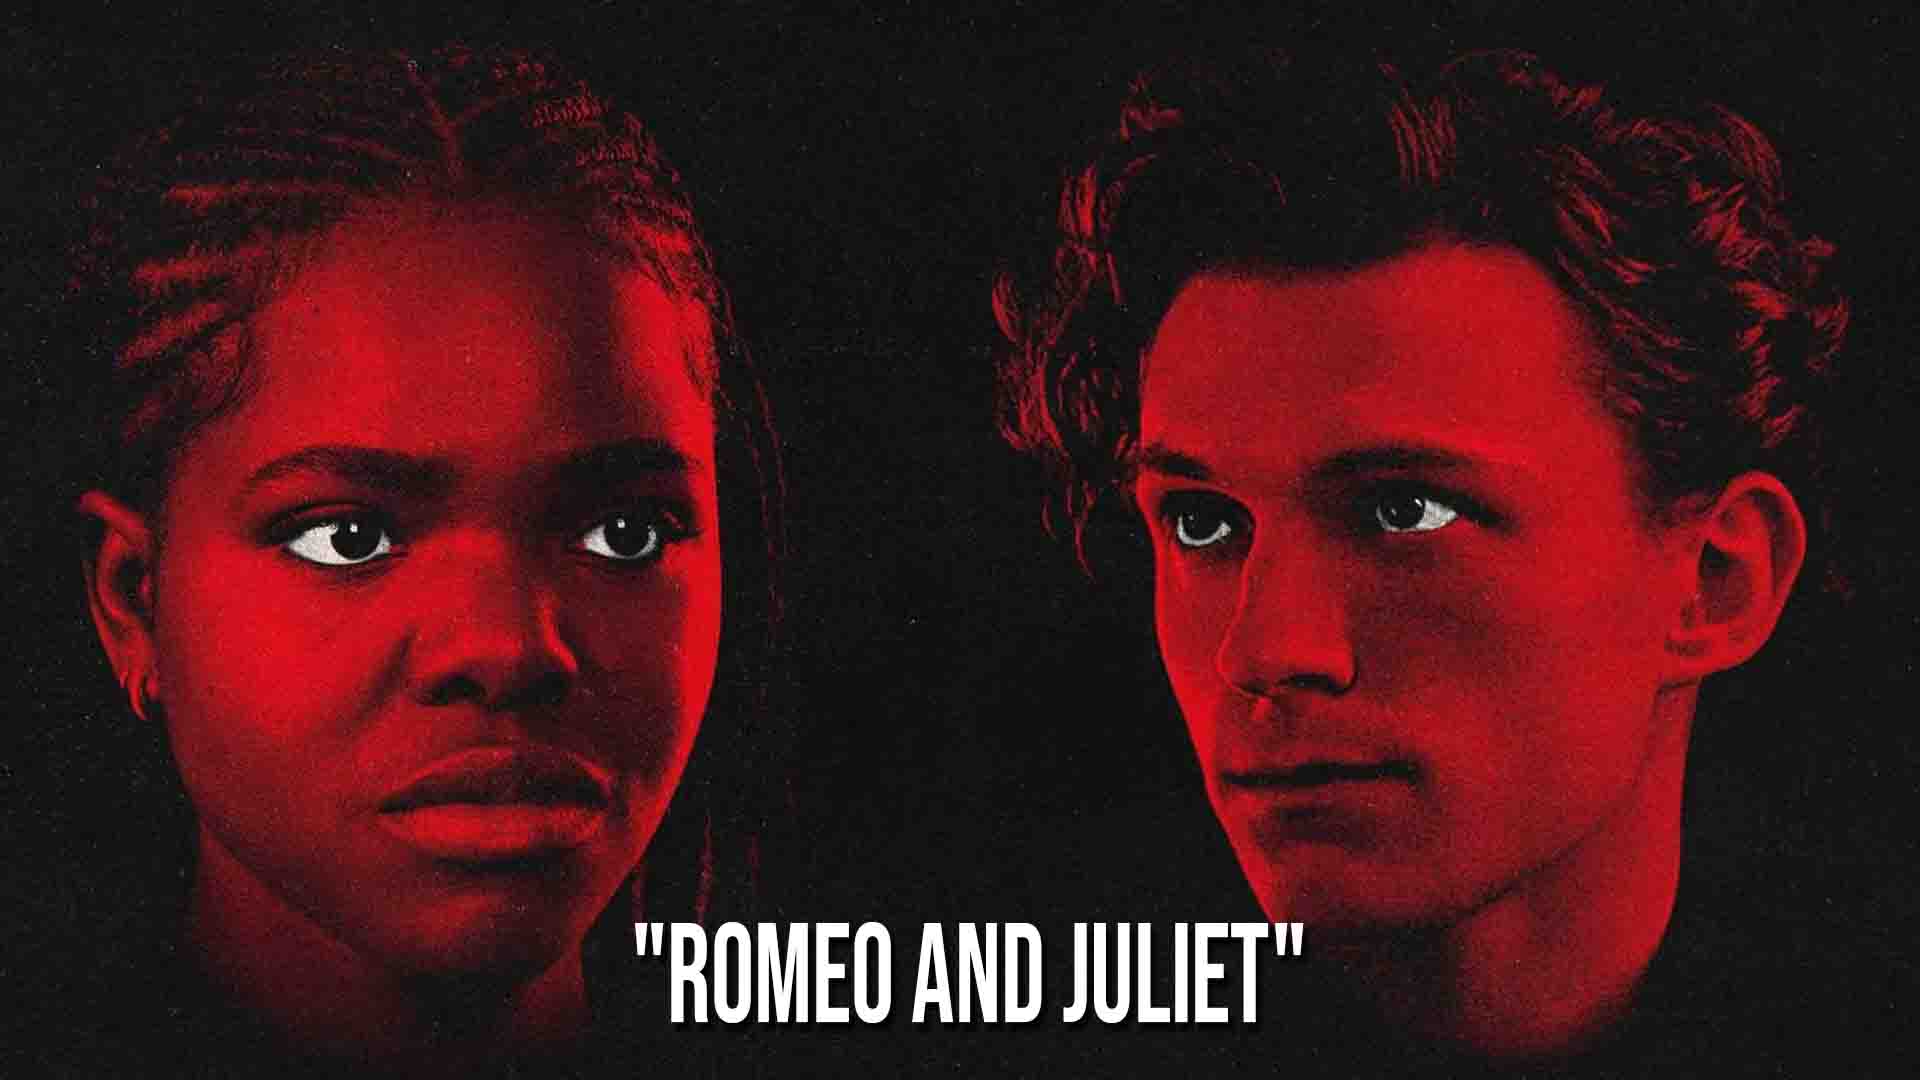 Tom Holland “Romeo and Juliet” Co-Star Face Racism!